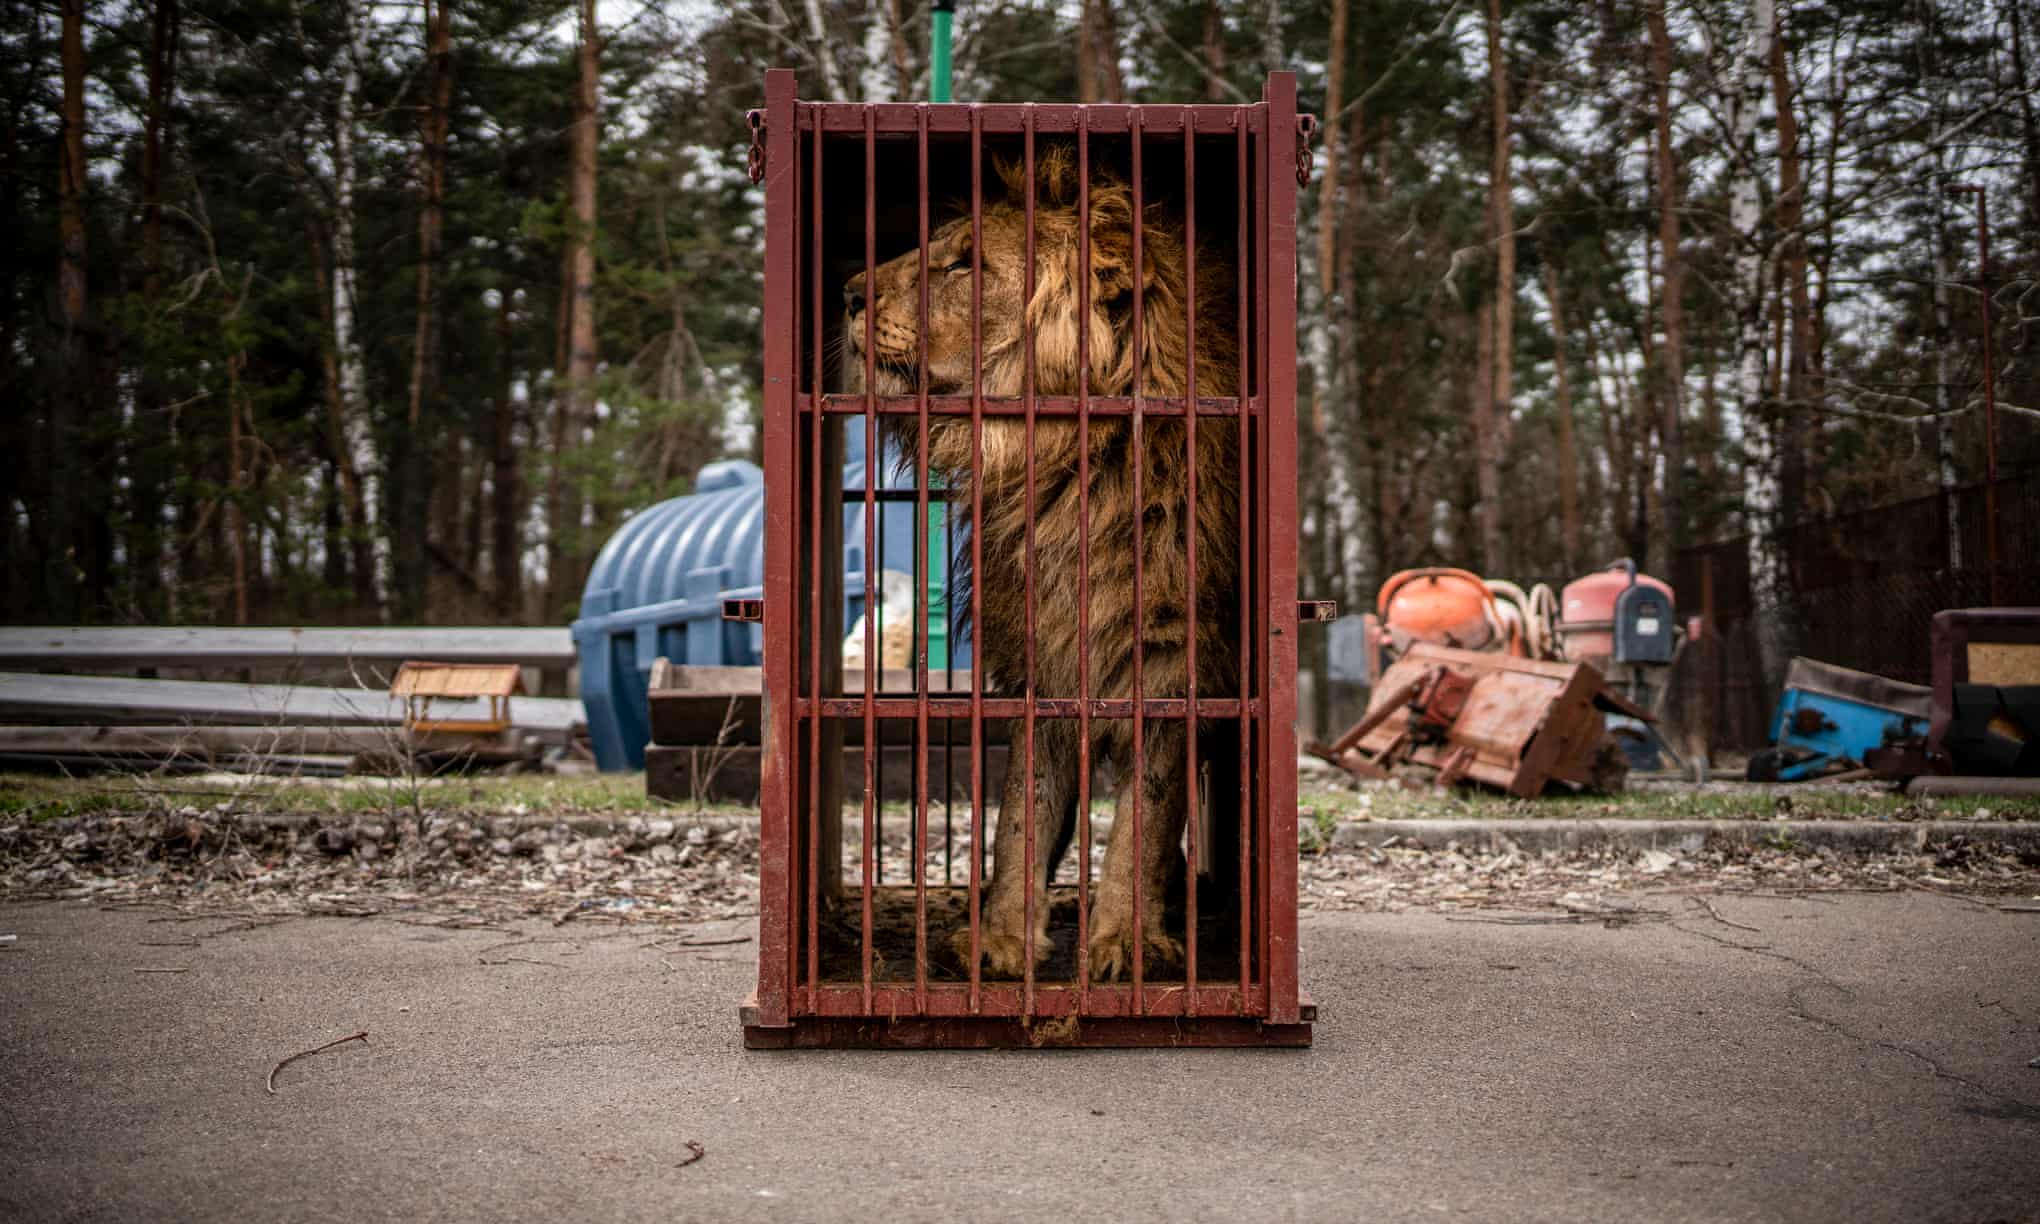 A young lion saved from Kharkiv Ecopark waits in a cage to be transferred to its new home